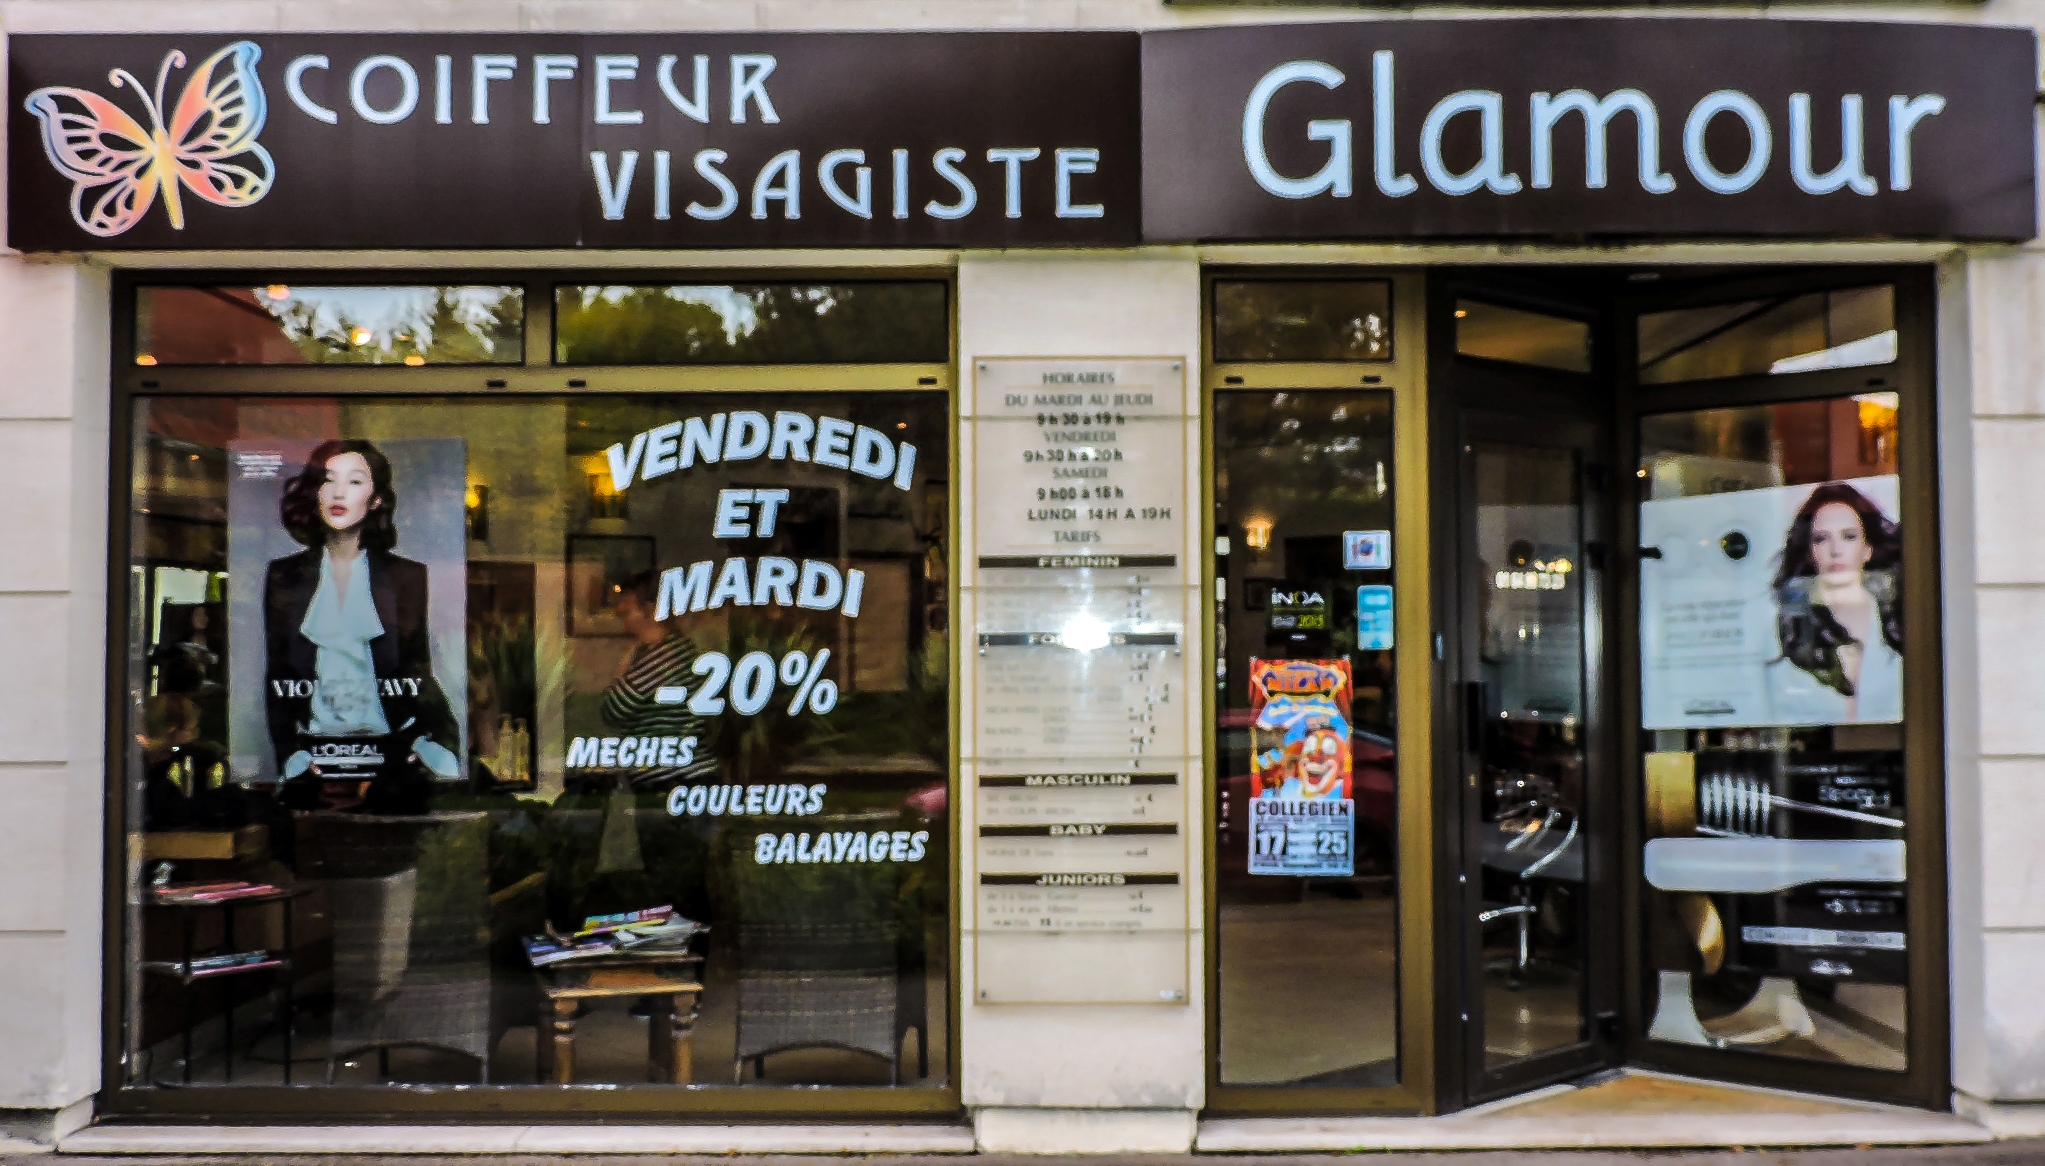 Contact Glamour Coiffure